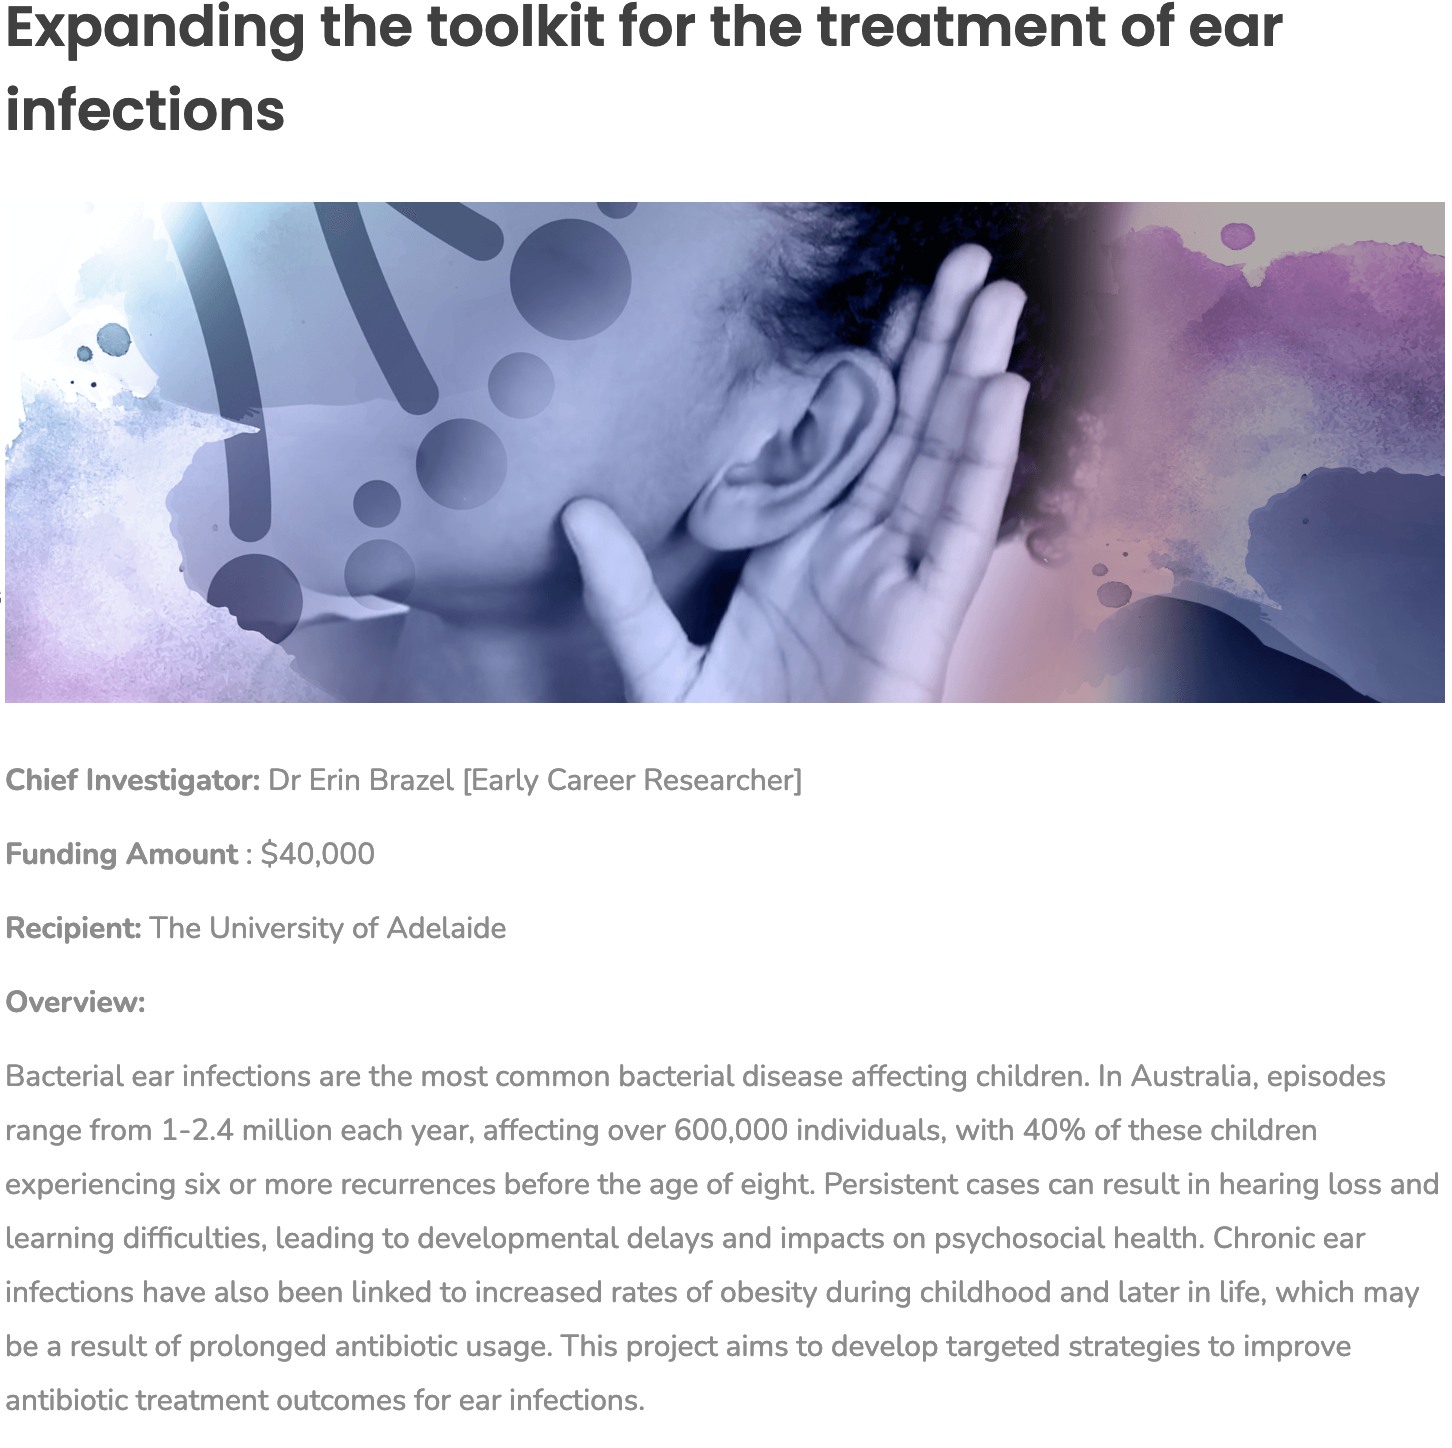 Expanding the toolkit for the treatment of ear infections